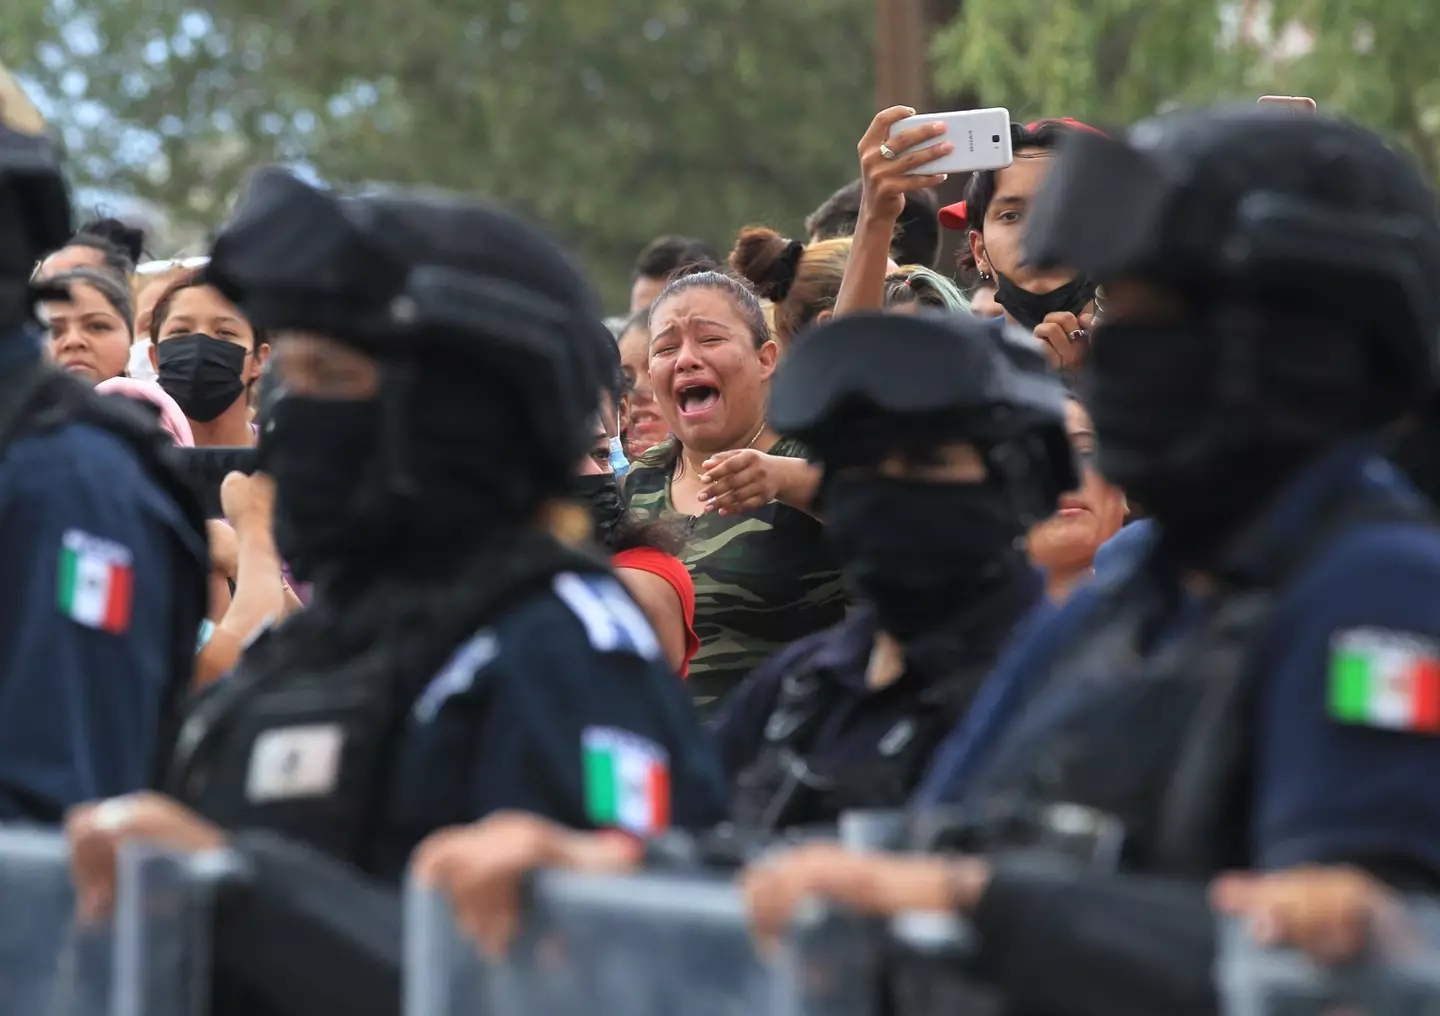 The confrontation between members of the two opponent cartels was taken to the streets of the bordering city of Ciudad Juárez.